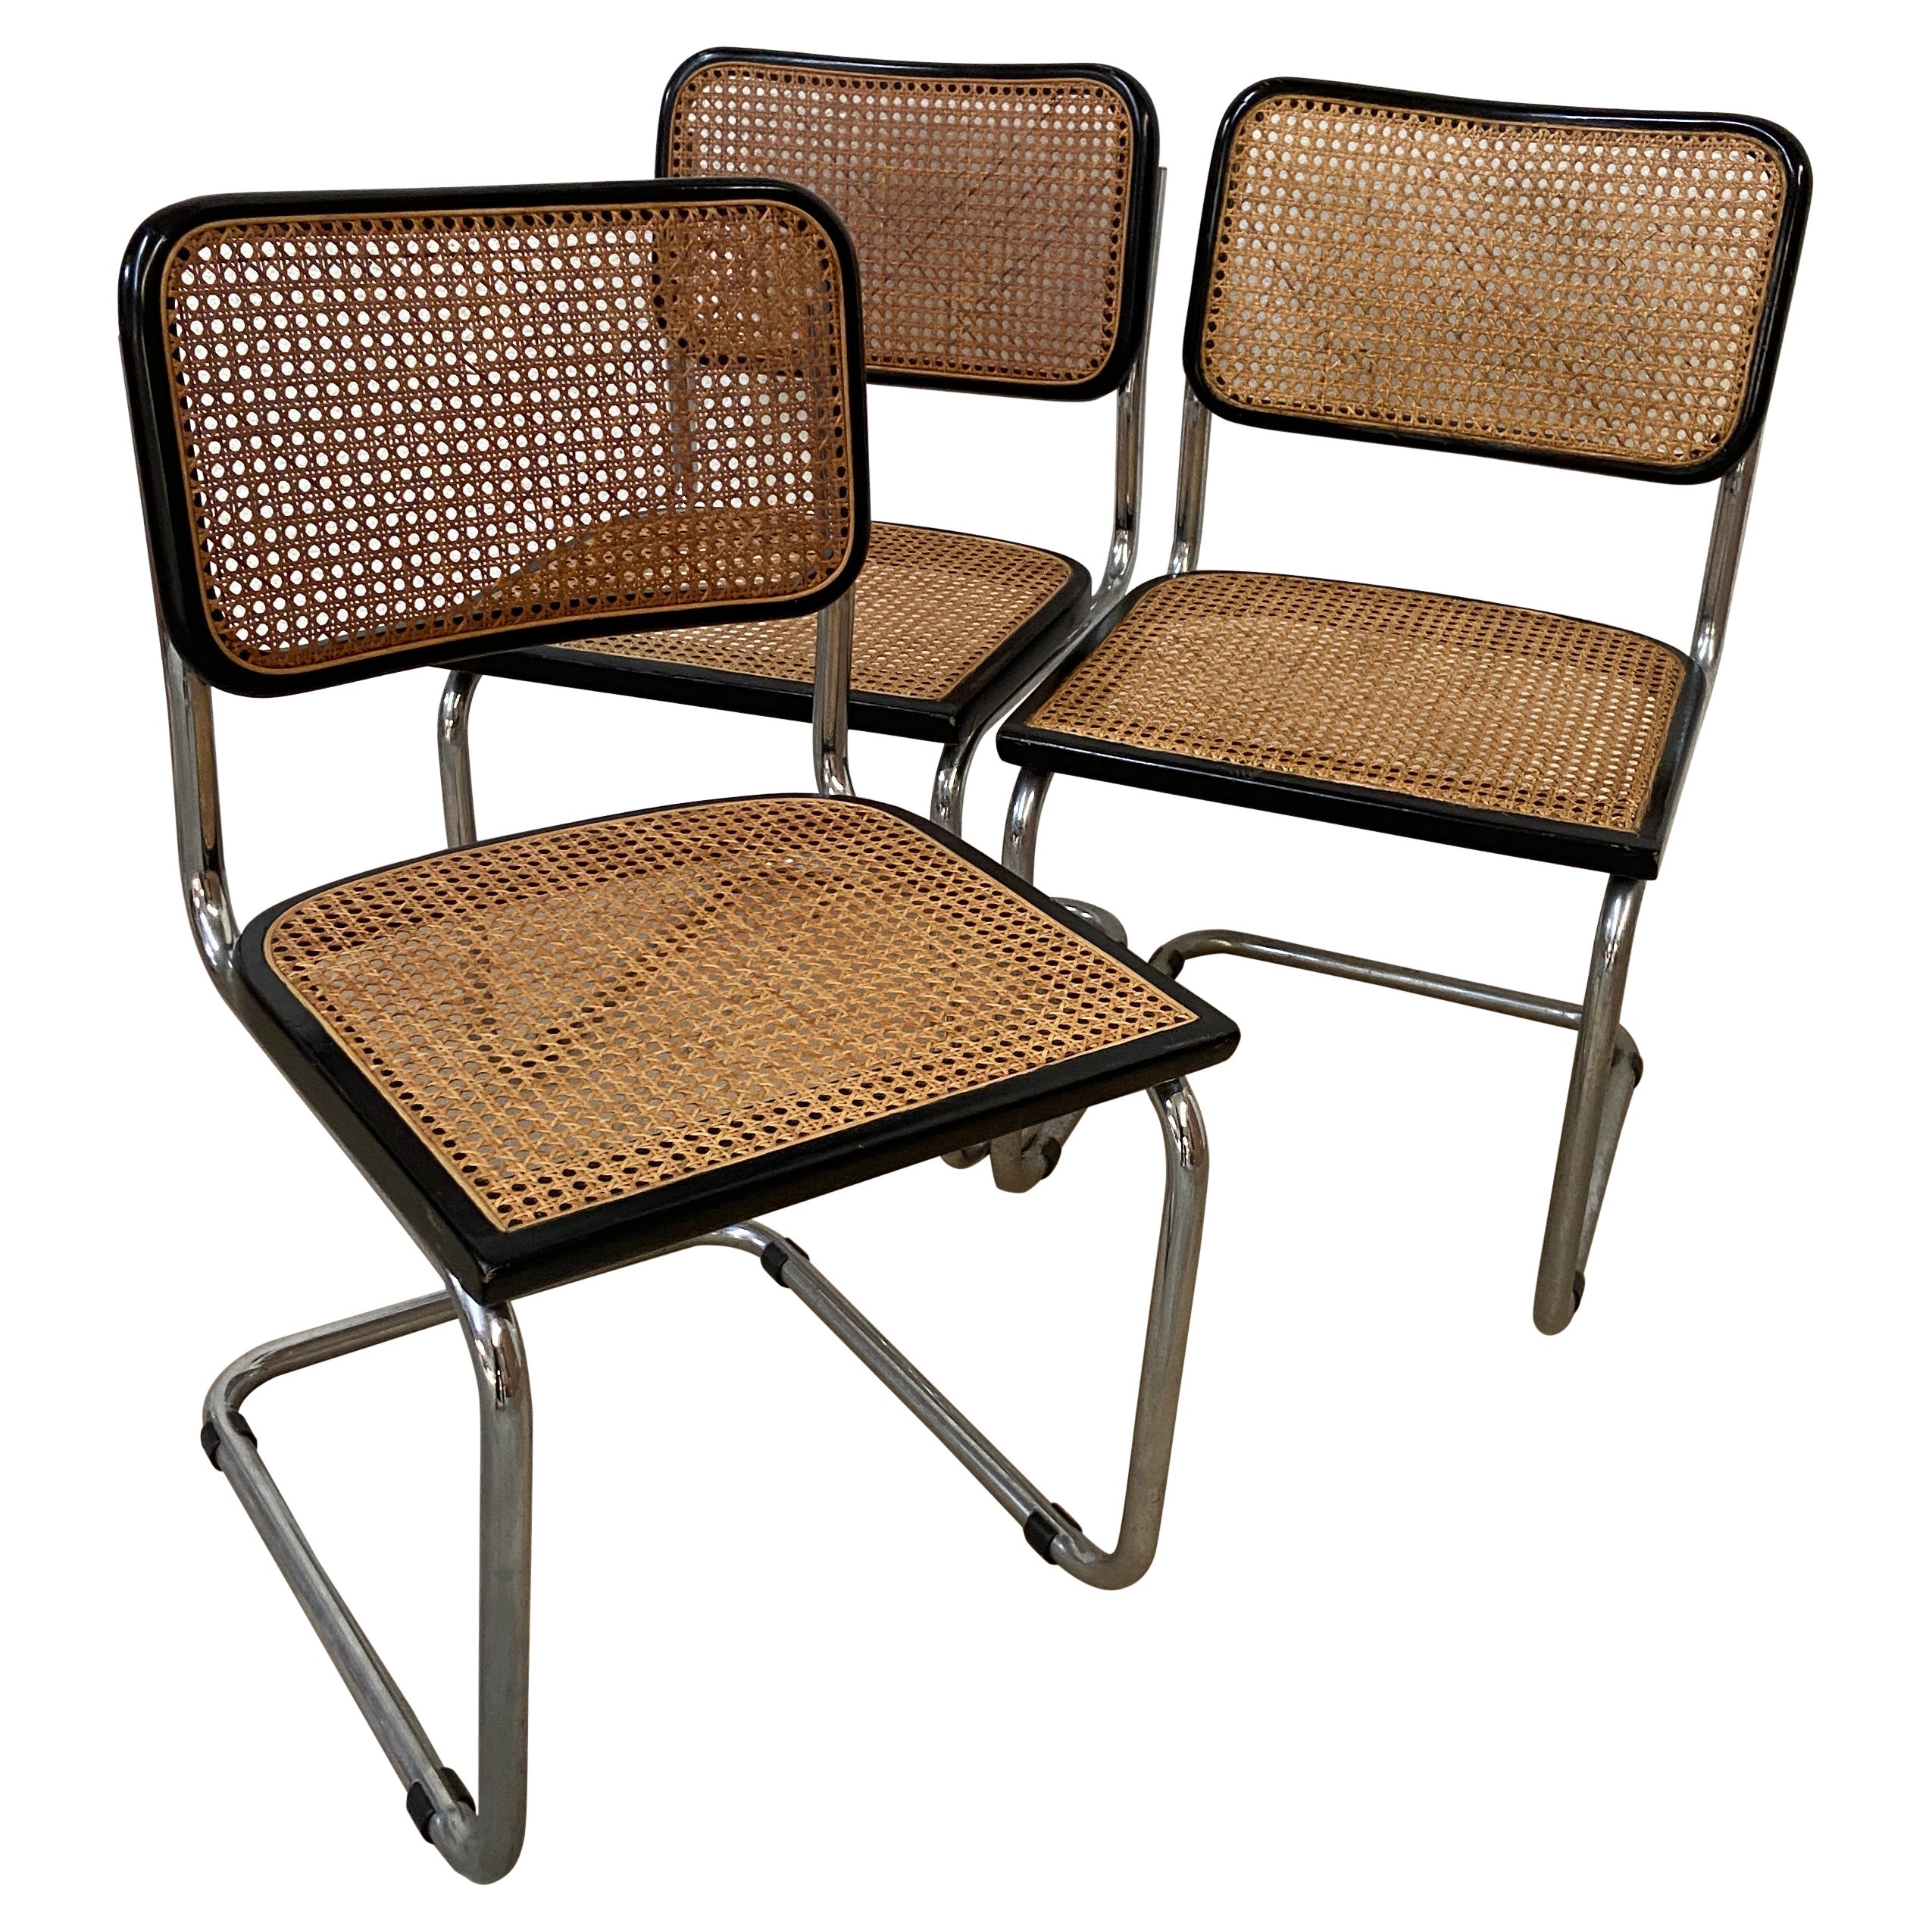 Cesca Chairs - 82 For Sale on 1stDibs | cesca style chairs